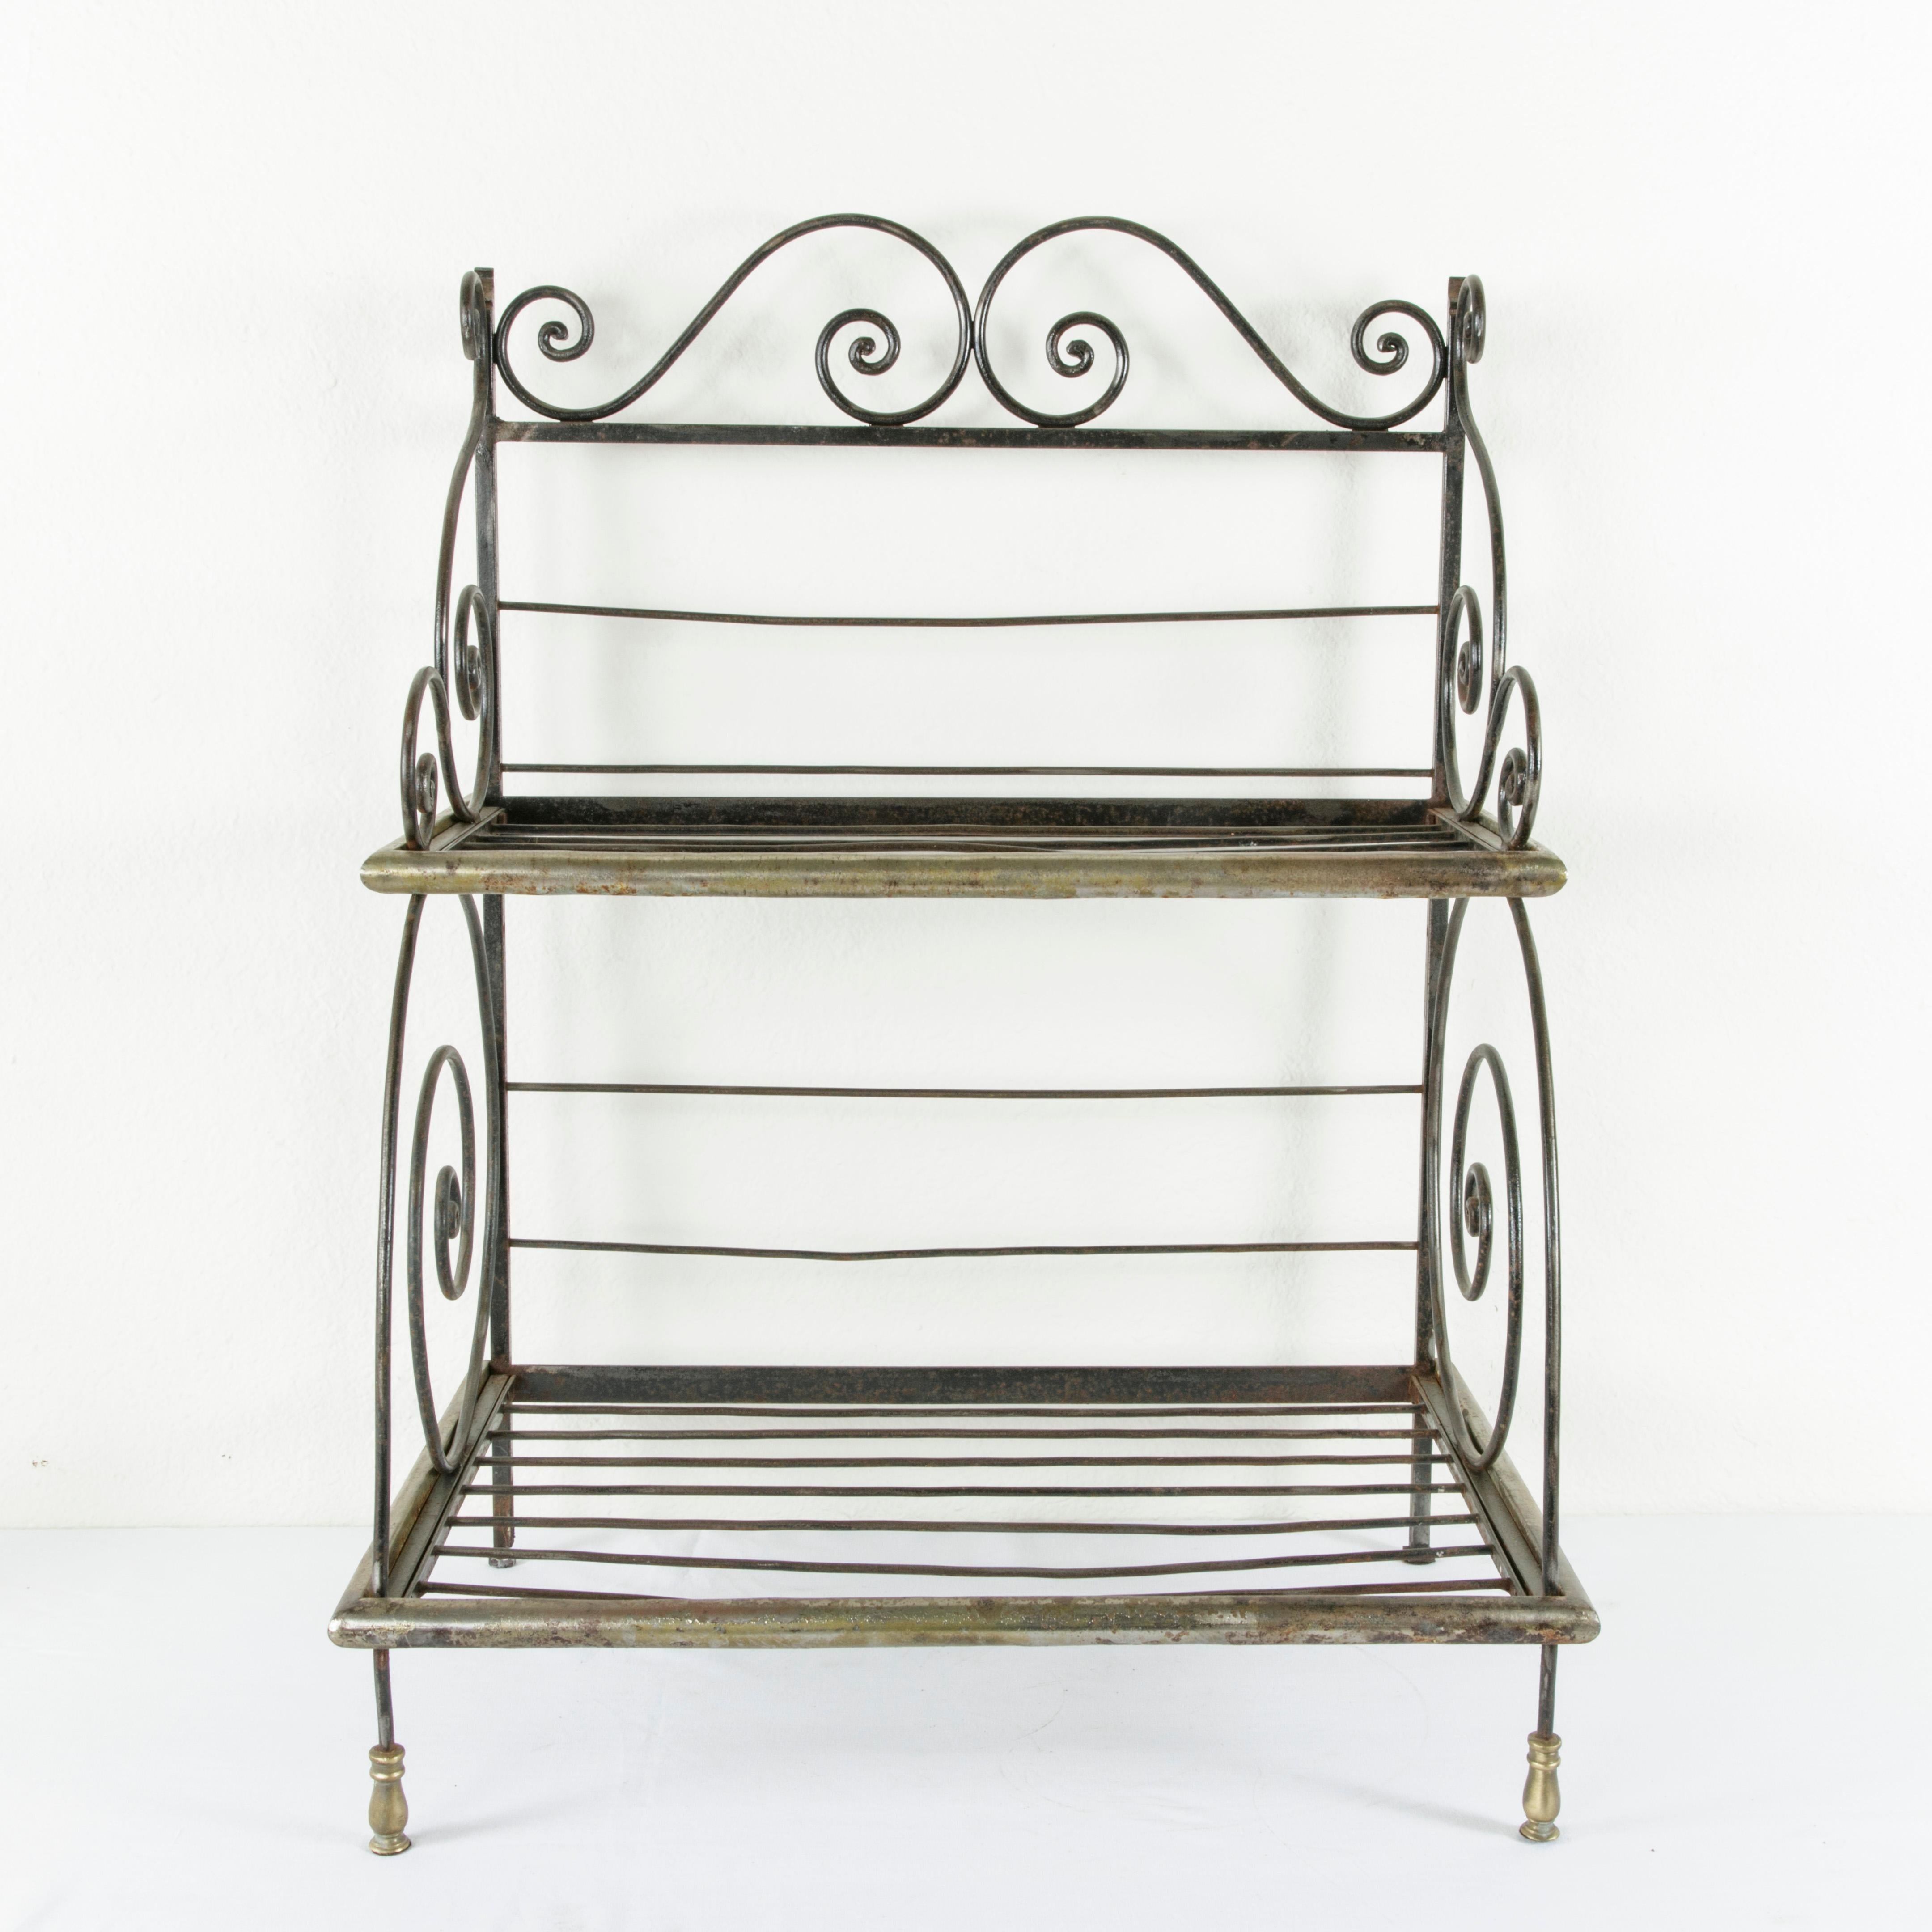 Originally placed upon a counter in a French boulangerie or bakery, this artisan-made iron baker's rack from the mid-20th century features brass detailing on its scrolling form. Brass plated steel banding surrounds the edges of its two shelves. Its